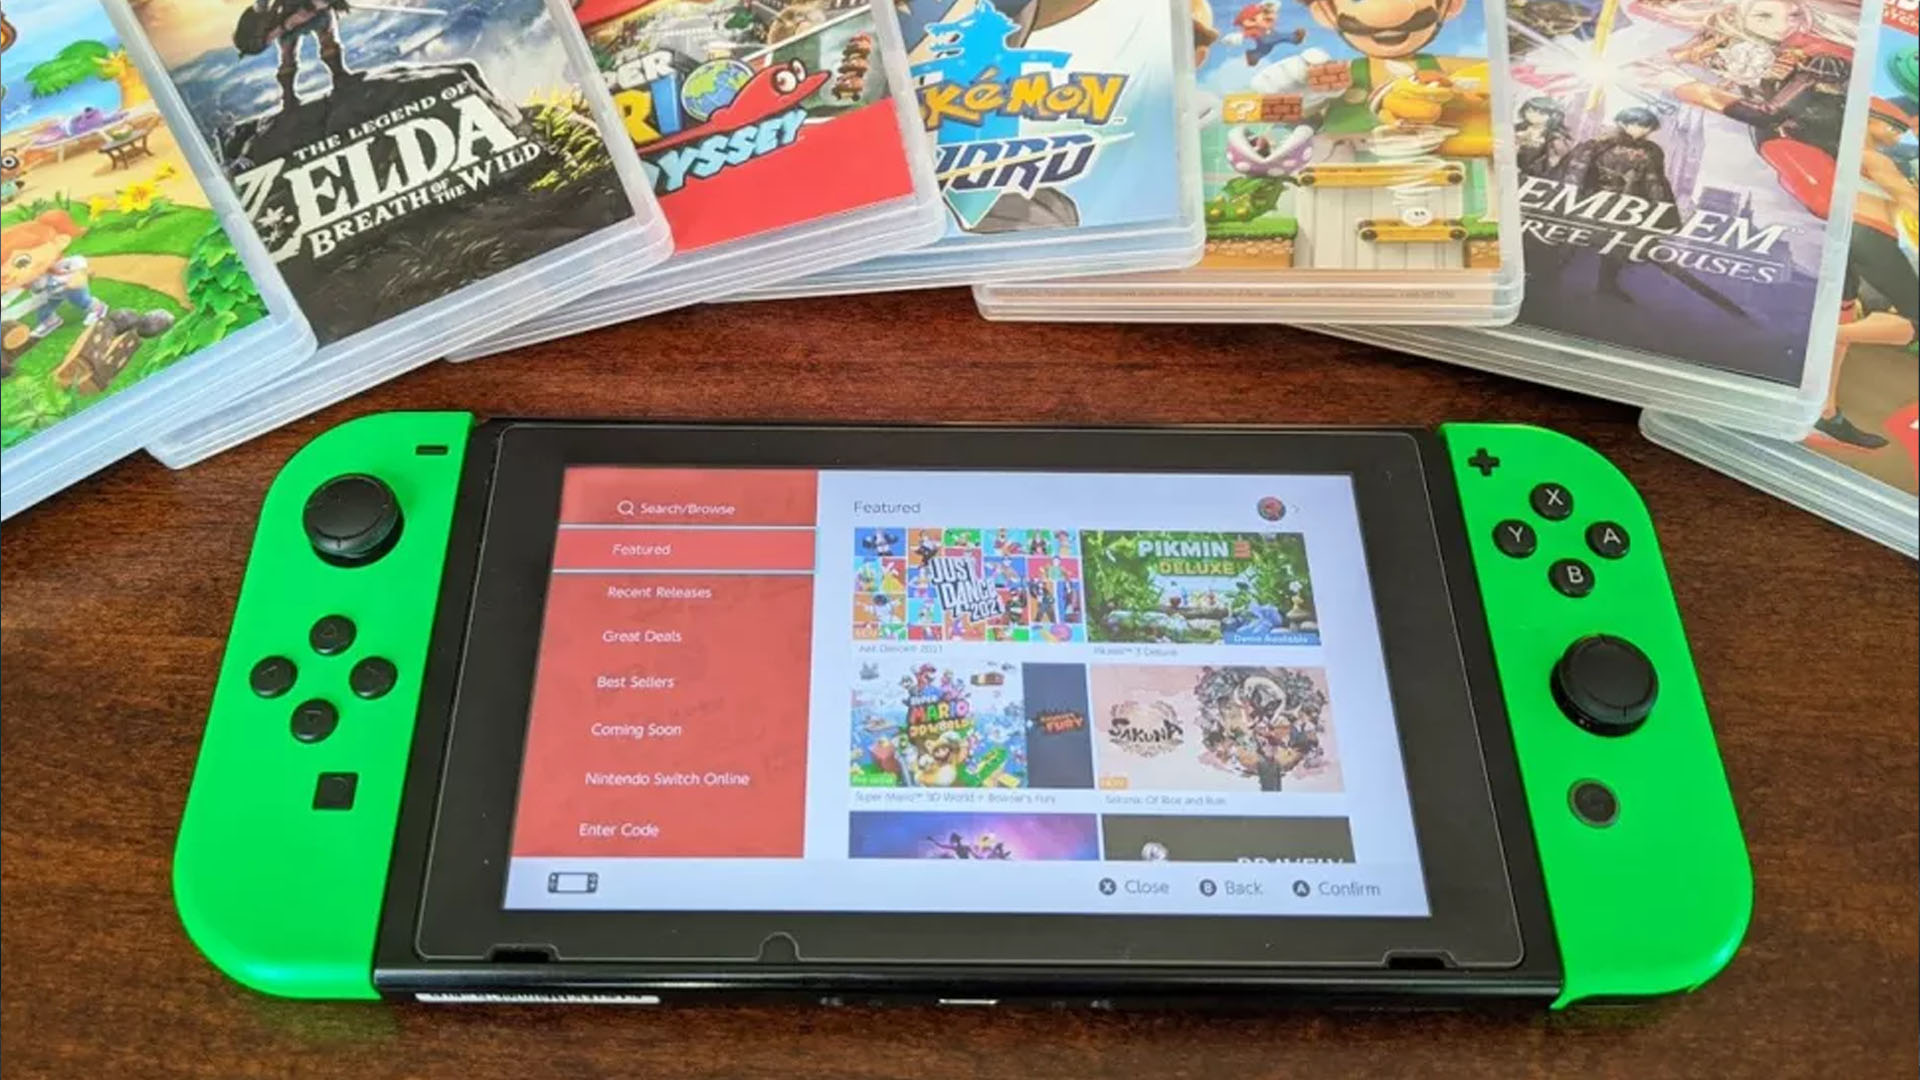 Digital vs. Switch games: Which is better? | iMore